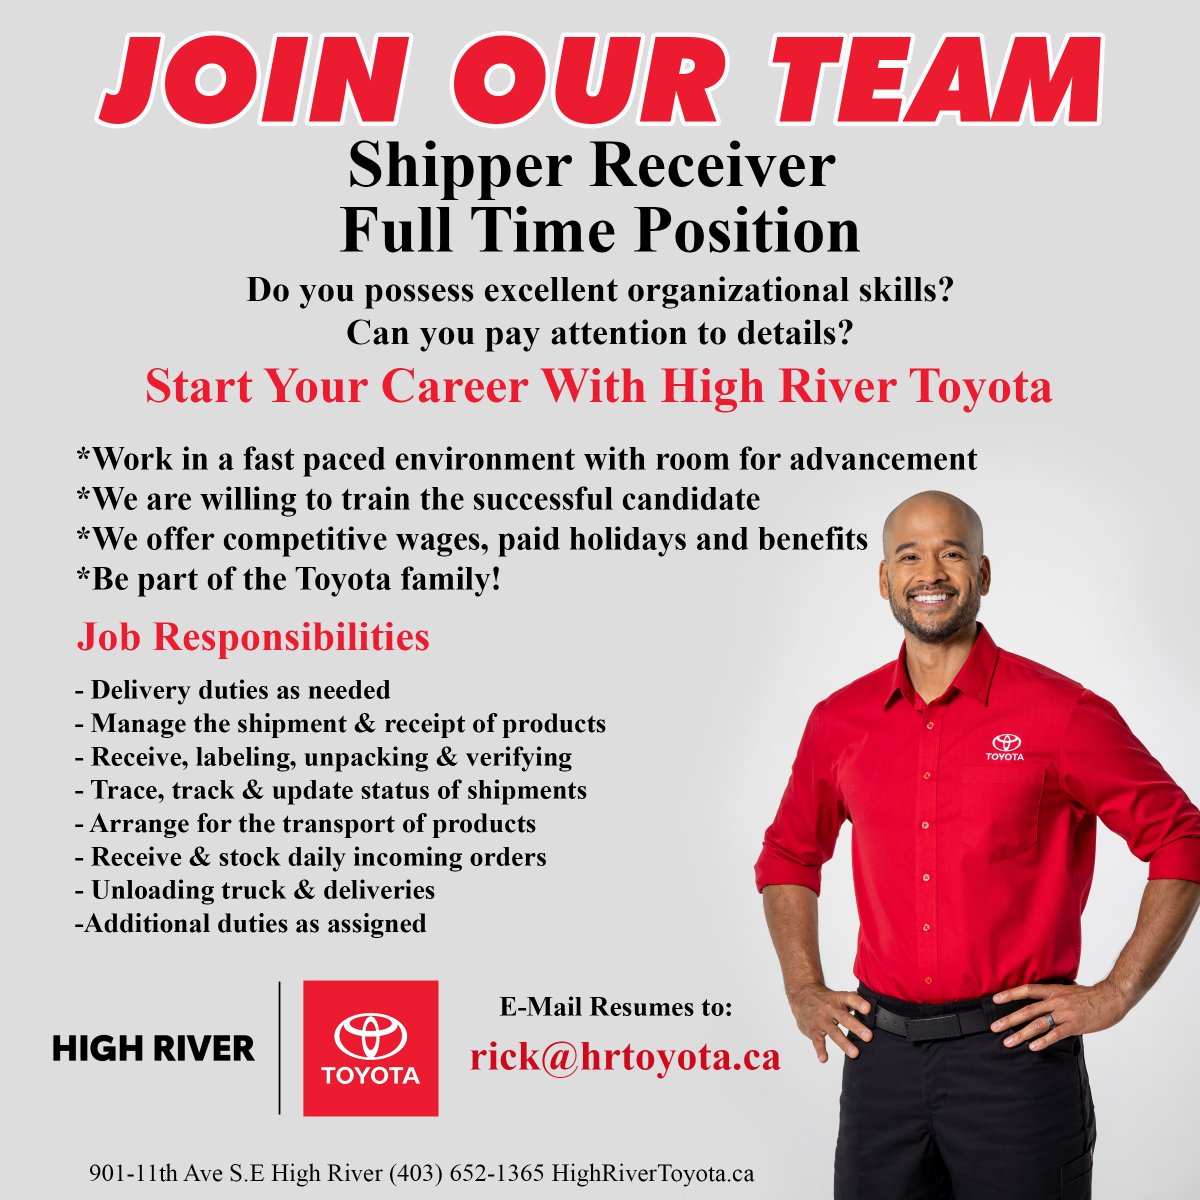 Our parts department is hiring! We have openings for a Parts Advisor and Shipping & Receiving. Start your career with High River Toyota today!

#hiring #hiringnow #hiringalert #highriver #okotoks #diamondvalley #nanton #yyc #calgary #alberta